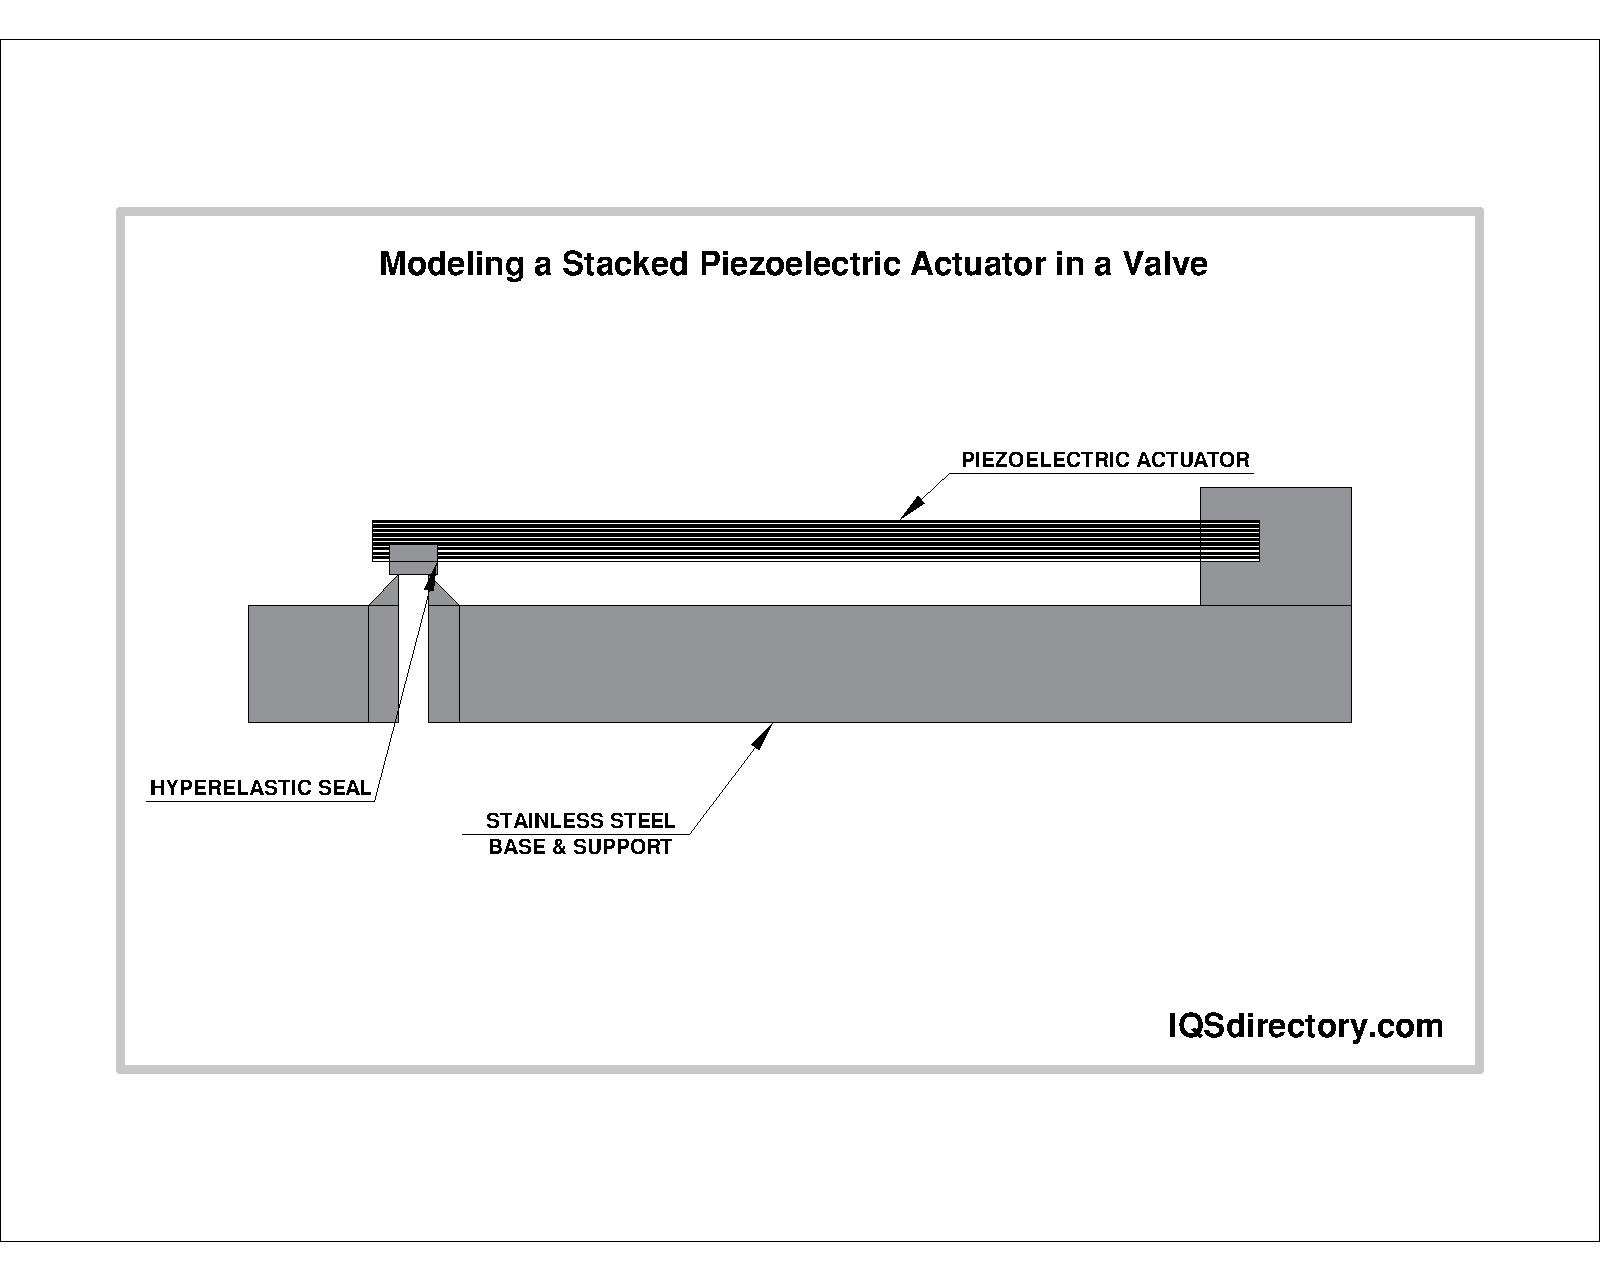 Modeling a Stacked Piezoelectric Actuator in a Valve